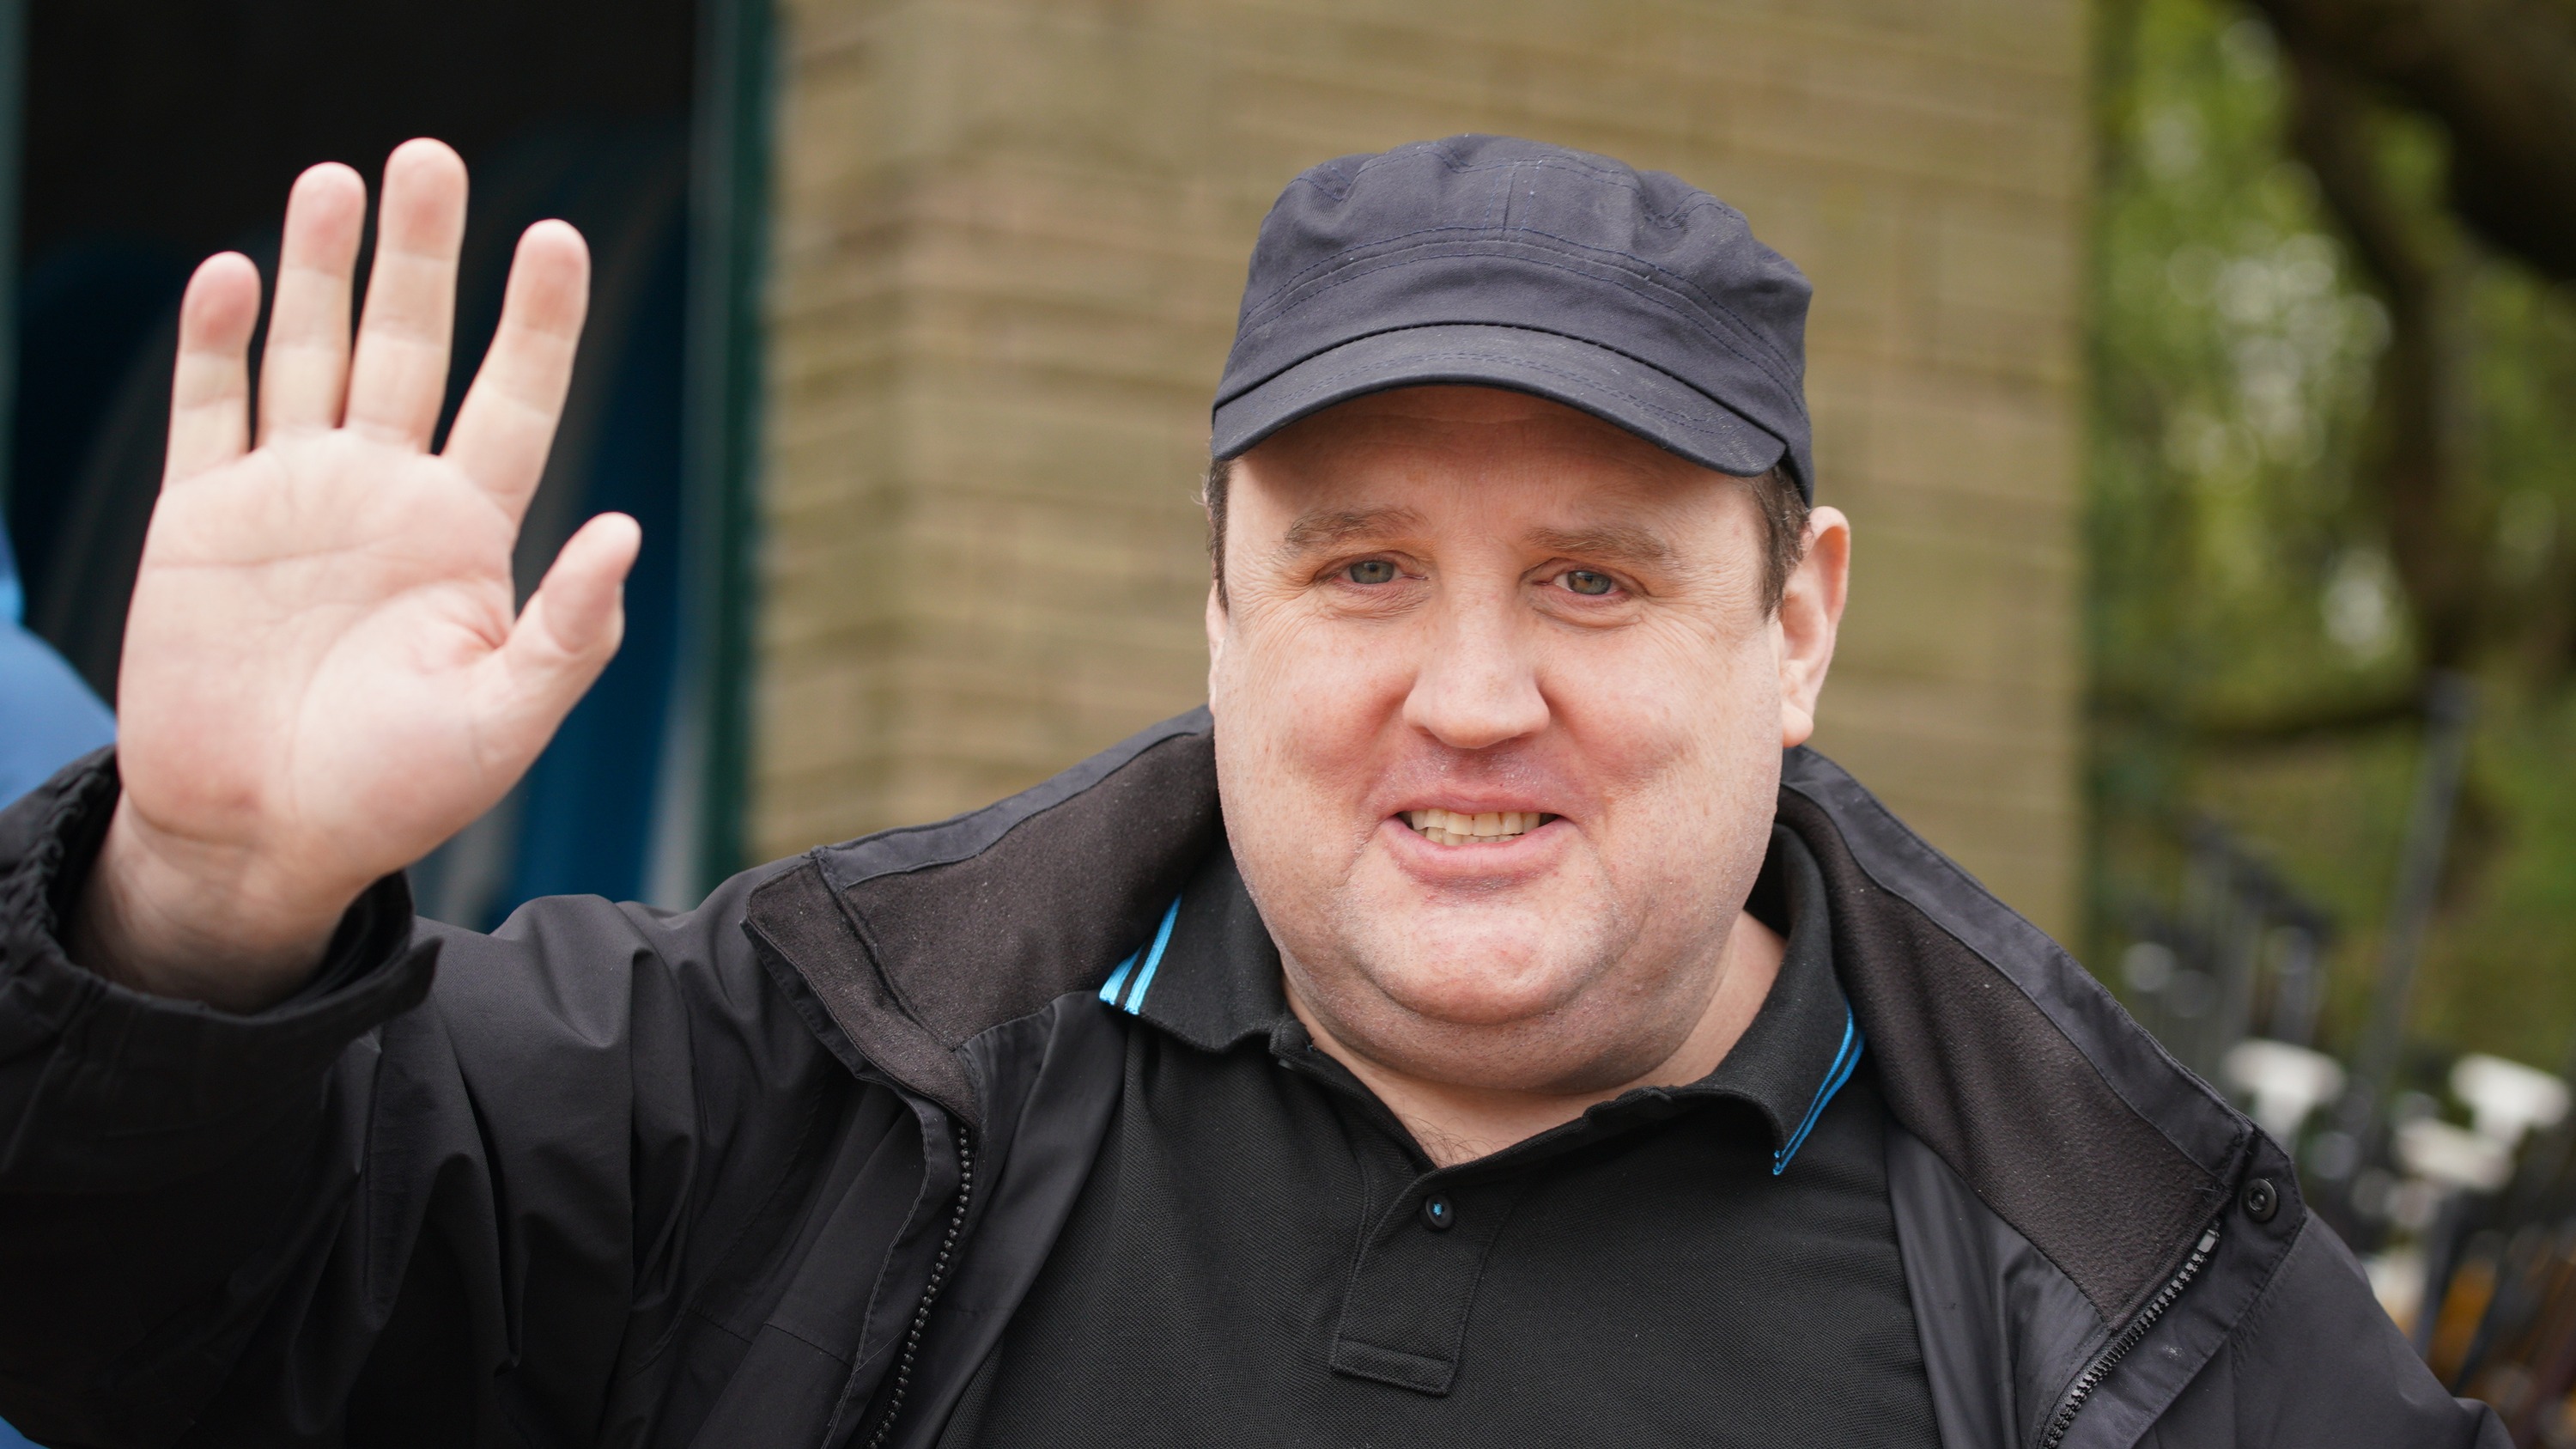 Peter Kay treats cancer patient to lunch at Michelin starred restaurant